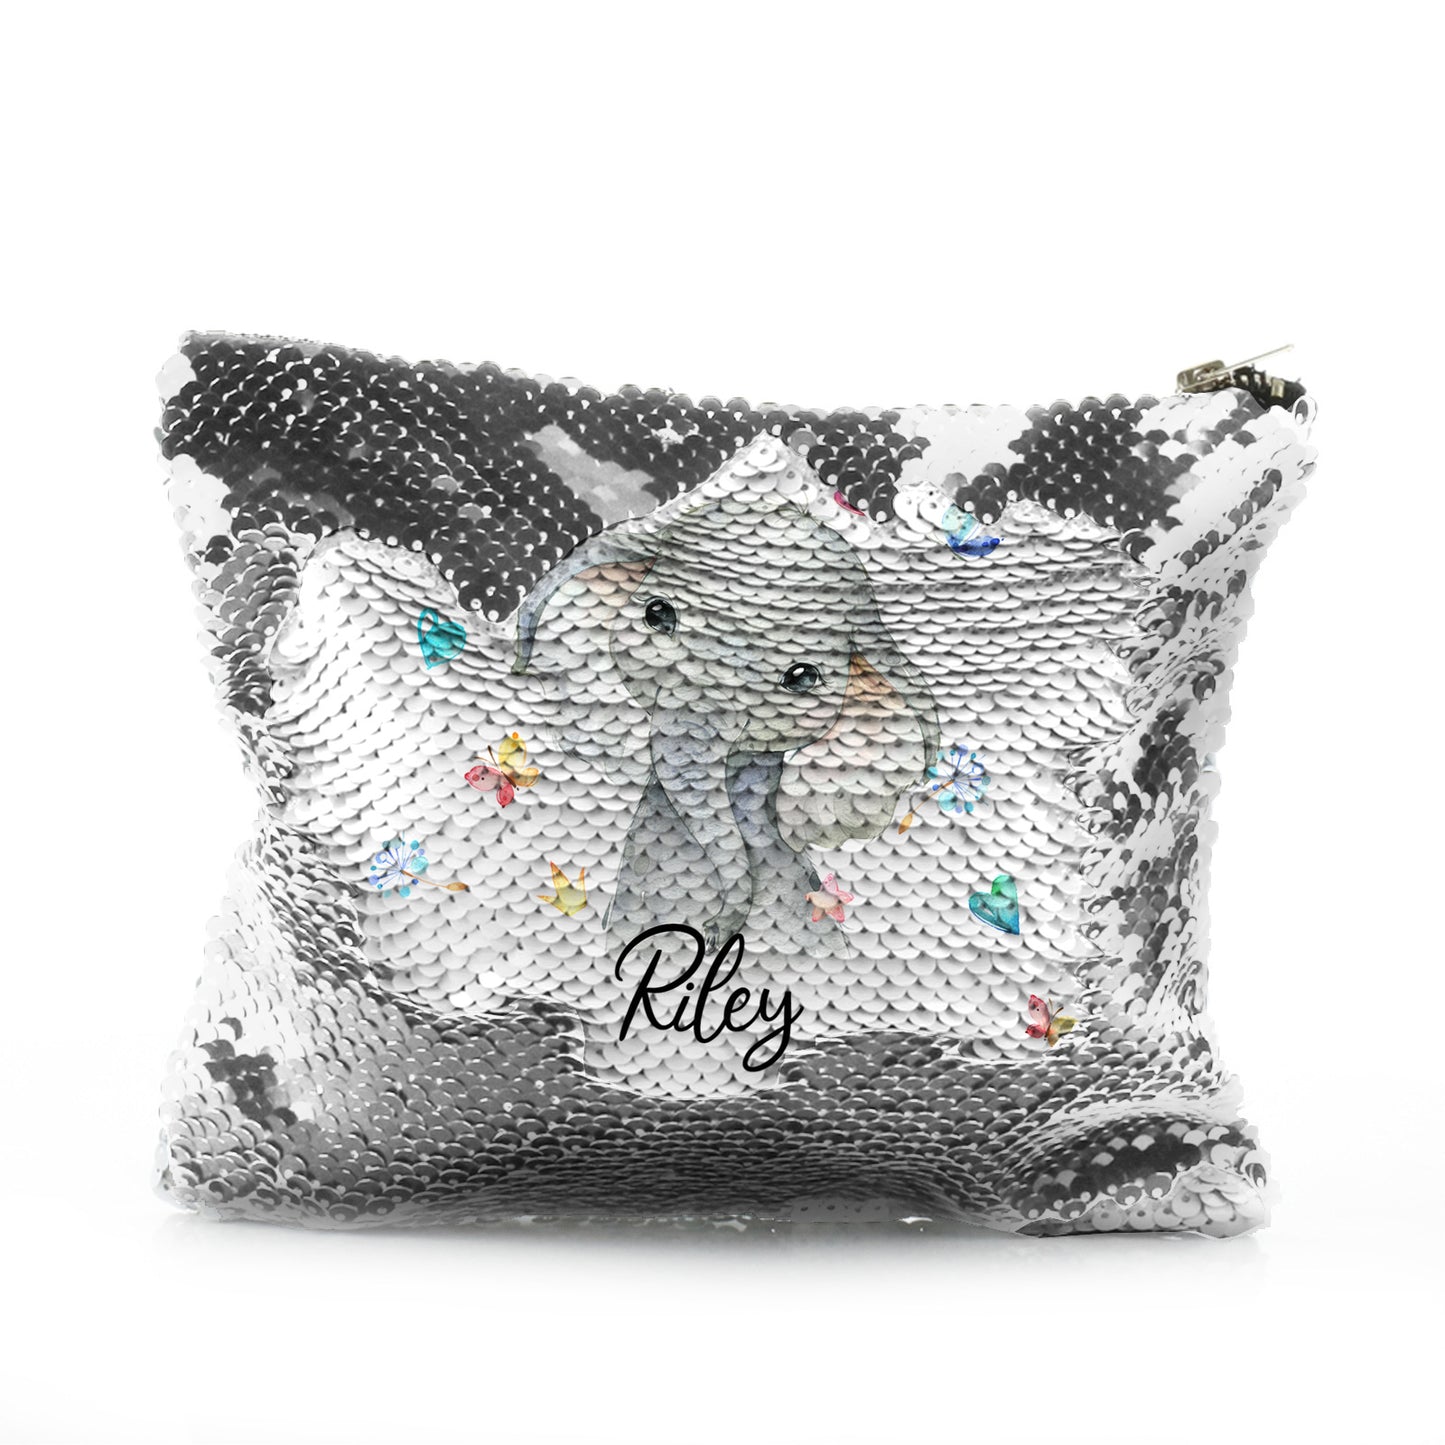 Personalised Sequin Zip Bag with Grey Elephant with Hearts Stars Crowns Butterfly and Cute Text